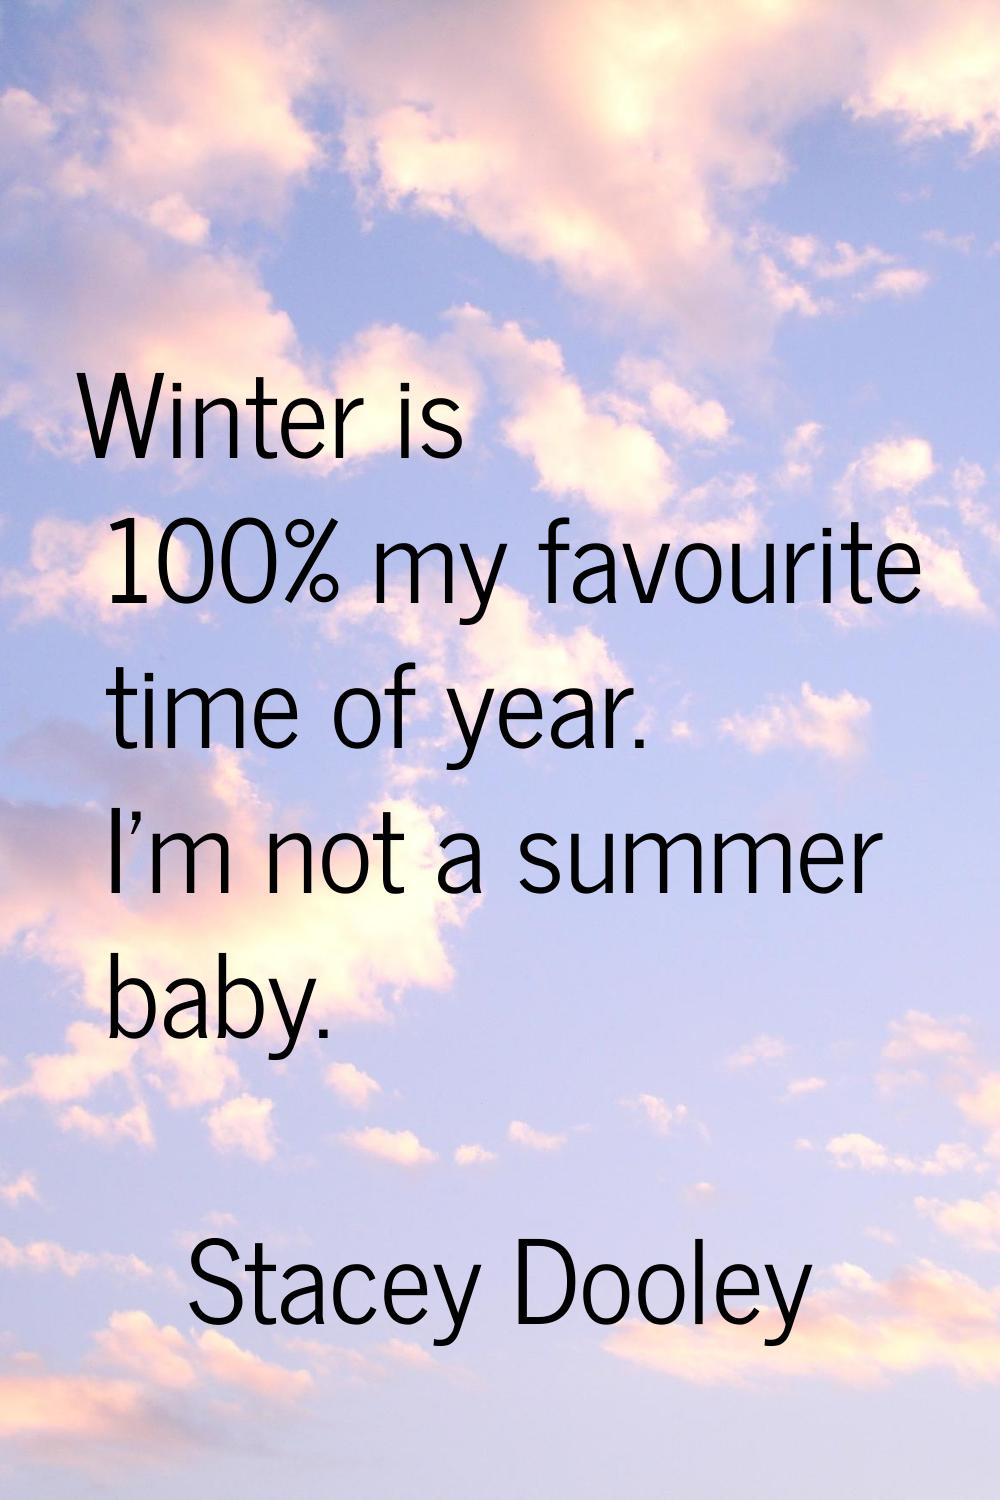 Winter is 100% my favourite time of year. I'm not a summer baby.